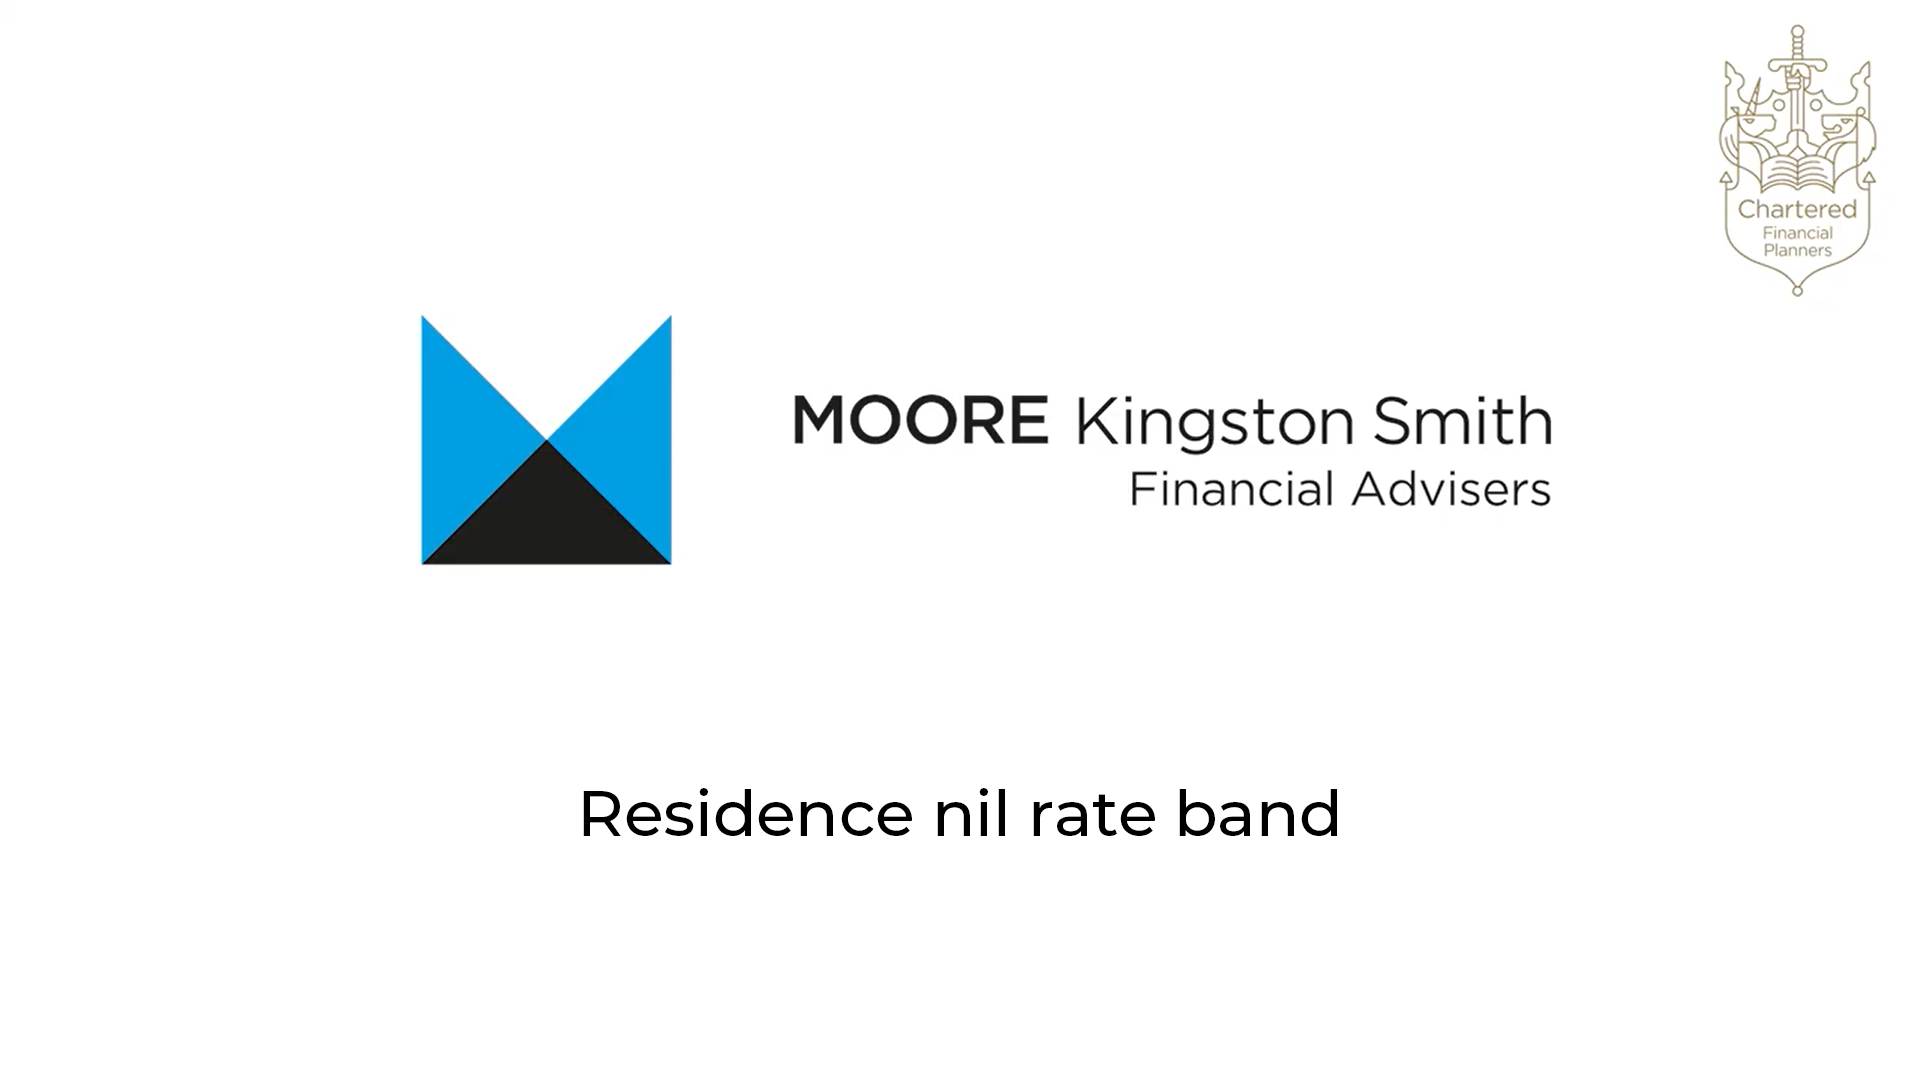 Residence nil rate band